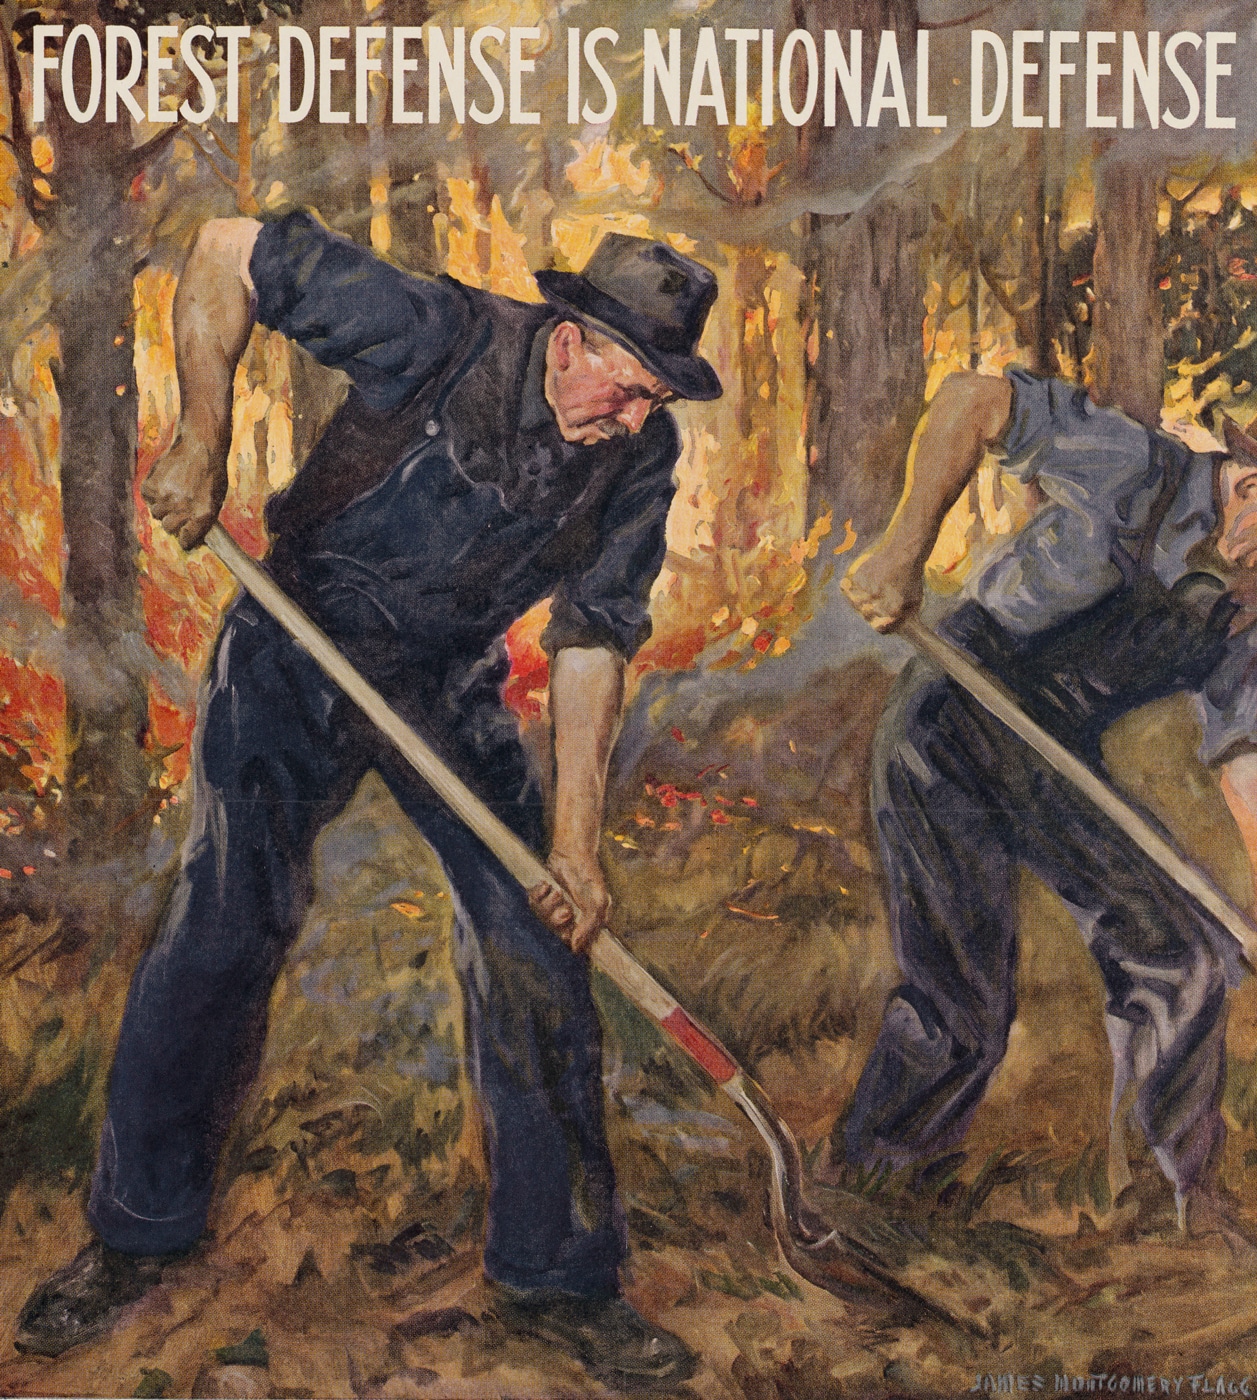 Shown here is a WWII poster reminding people that Forest Defense is National Defense.